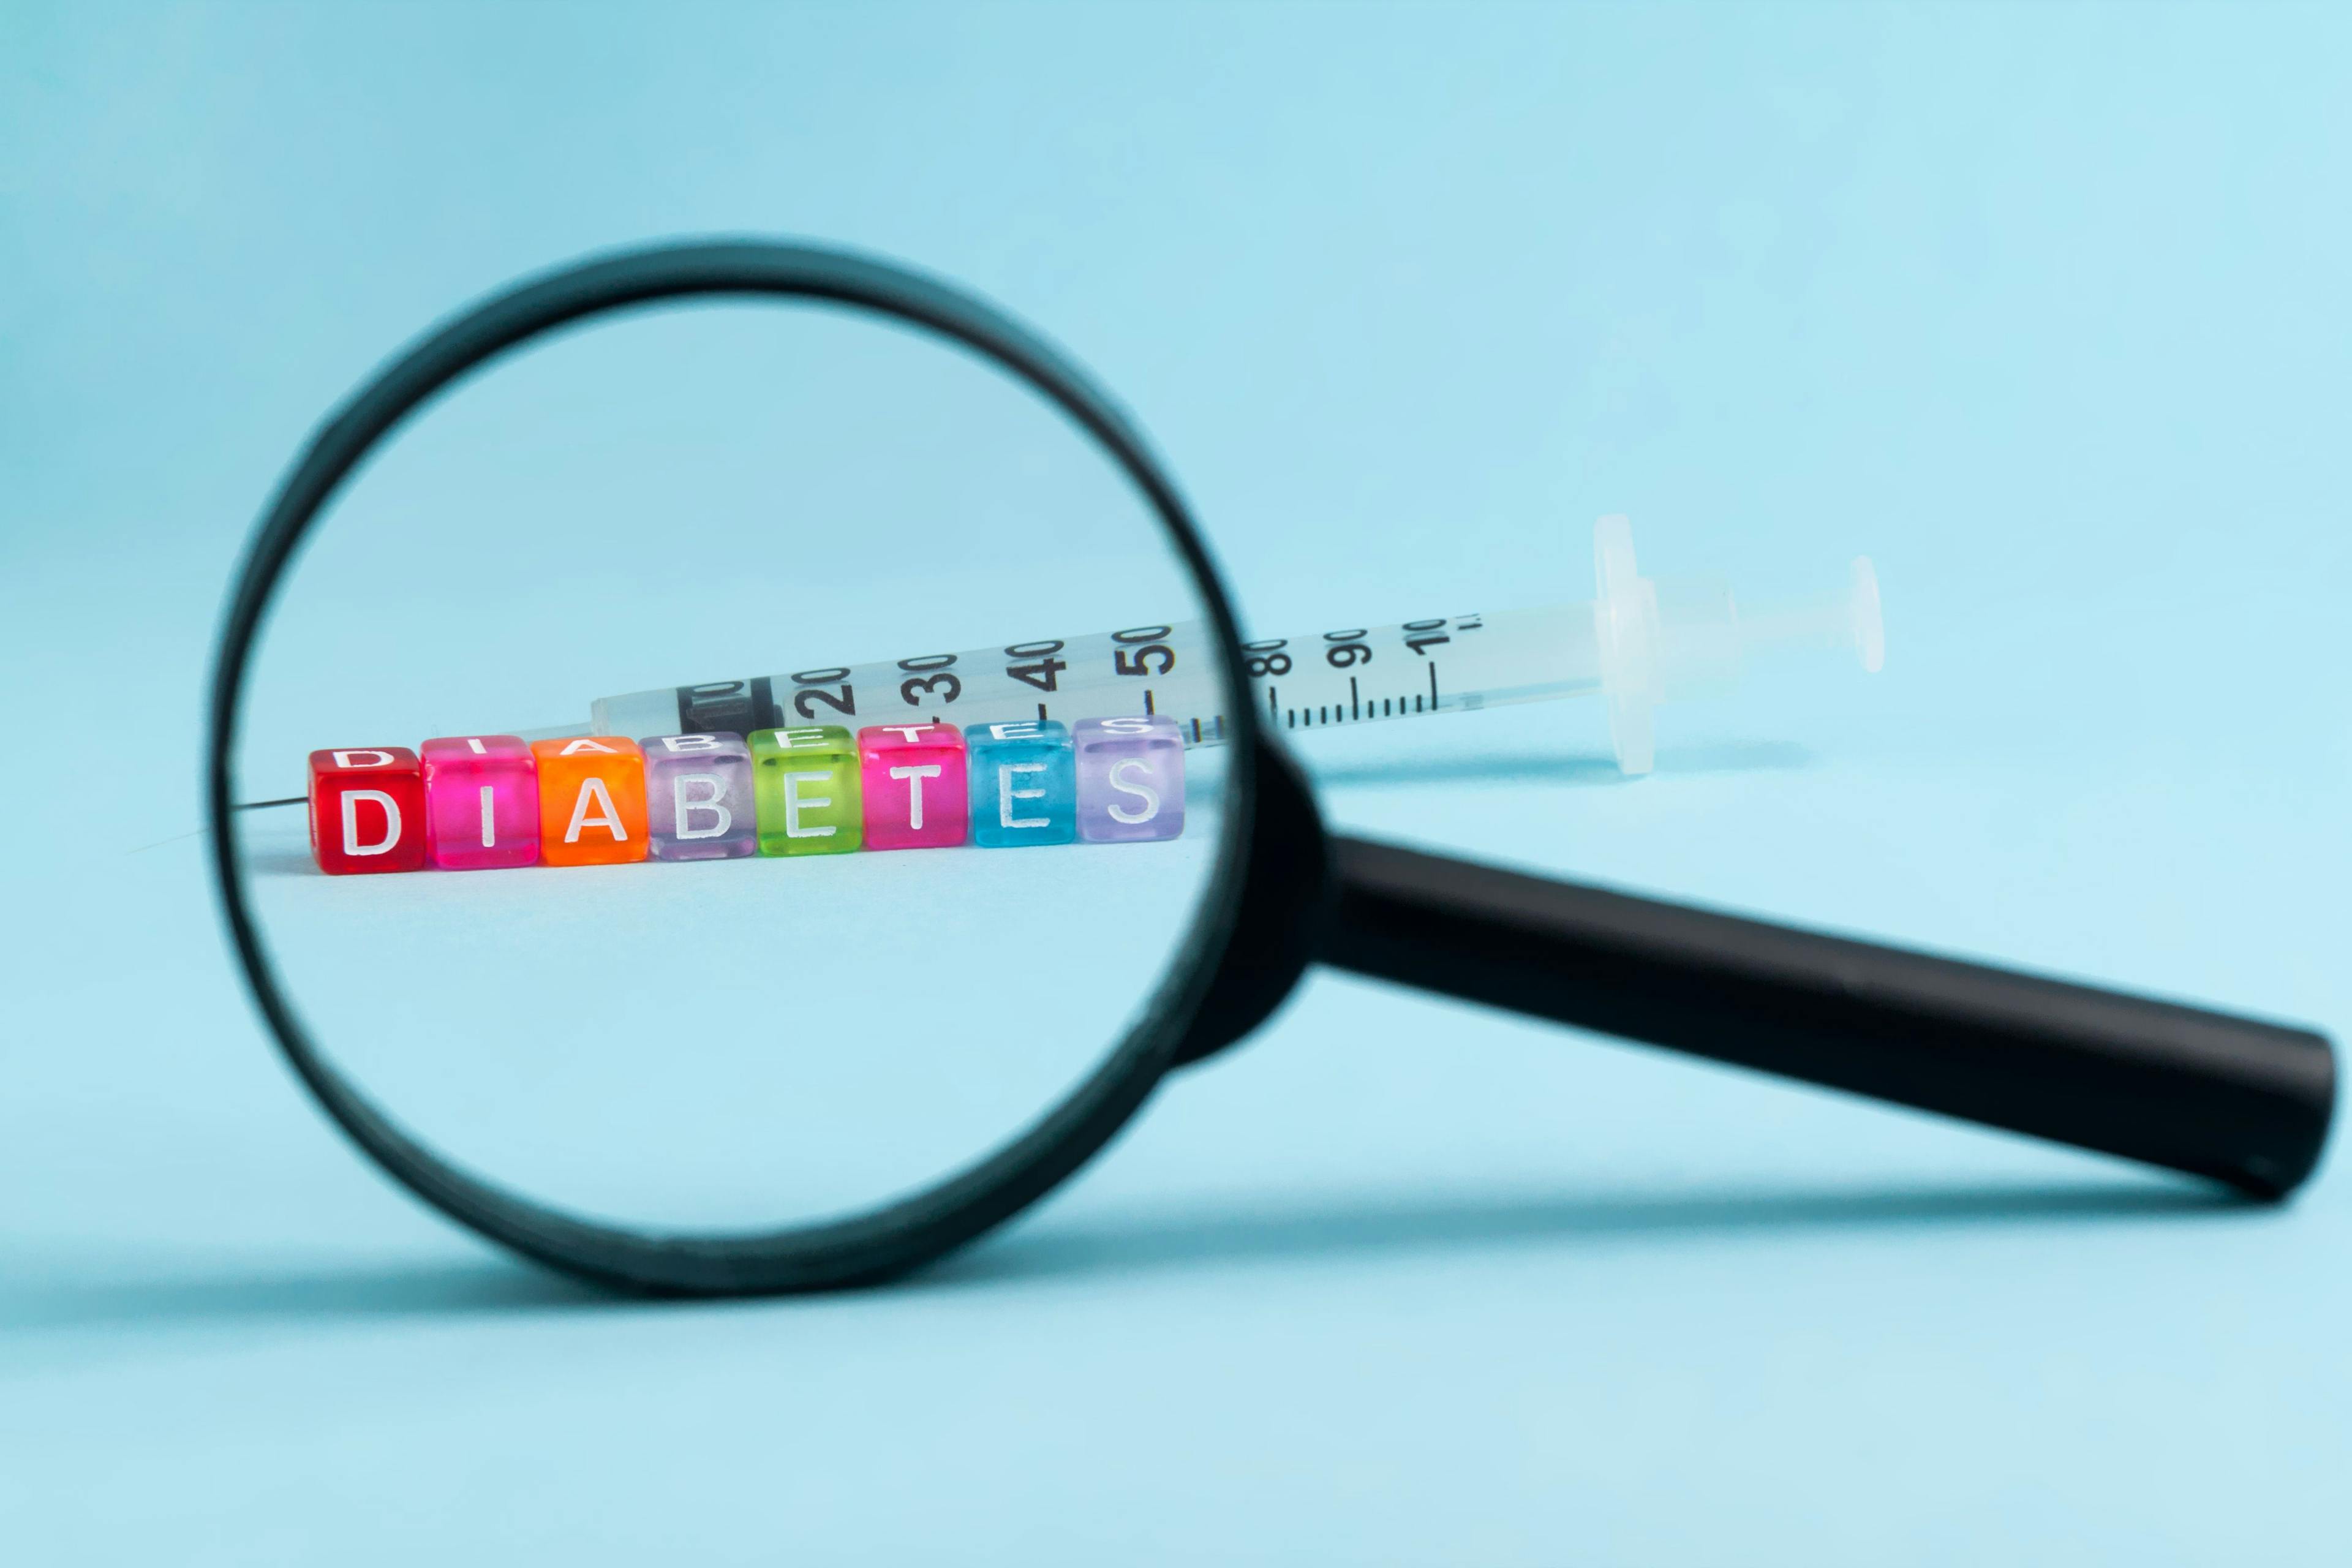 magnifying glass that highlights the word diabetes | Image credit: ©Goffkein  stock.adobe.com